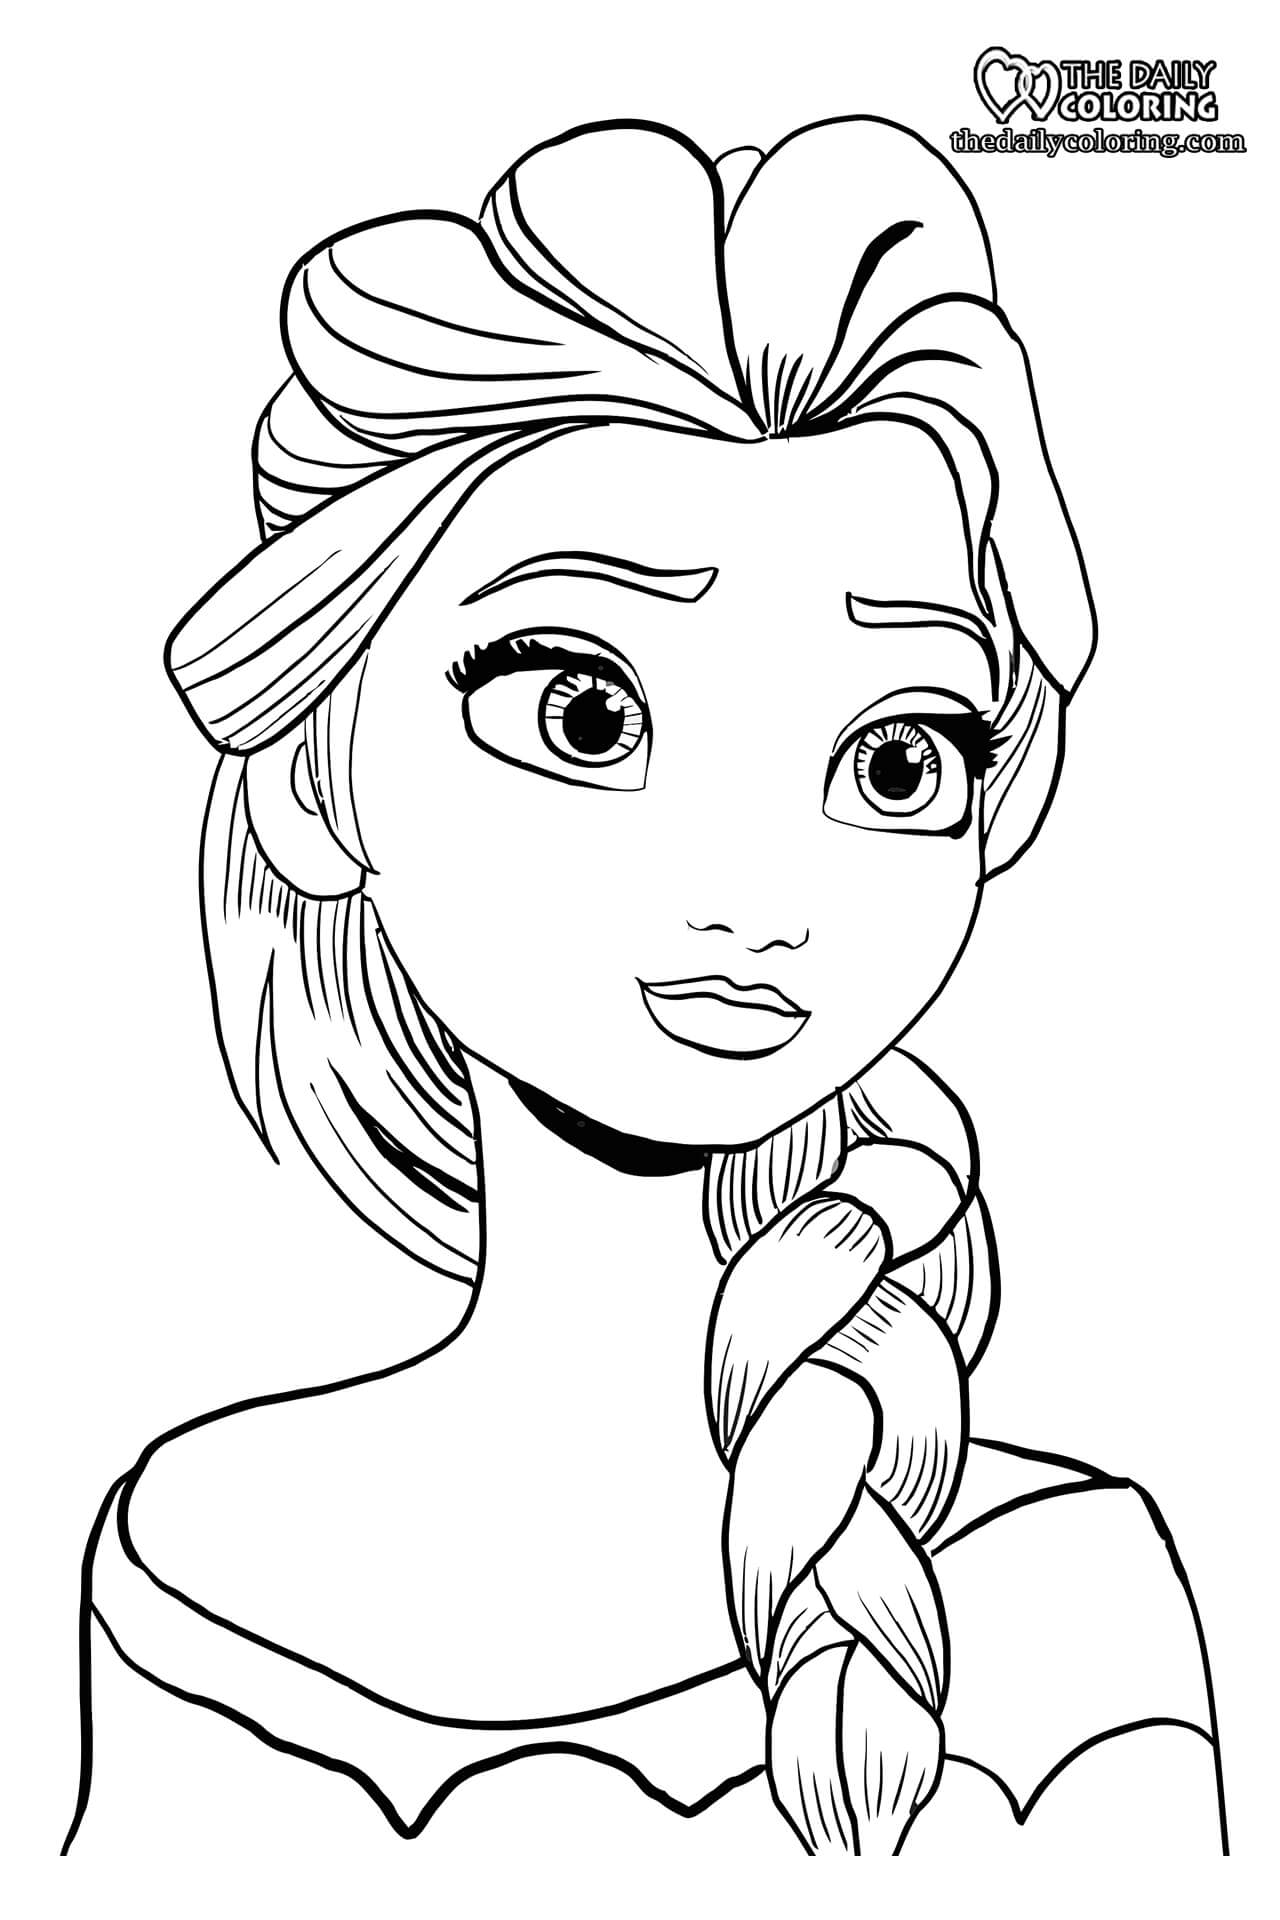 Elsa and Anna Coloring Pages [18 Pages]   The Daily Coloring